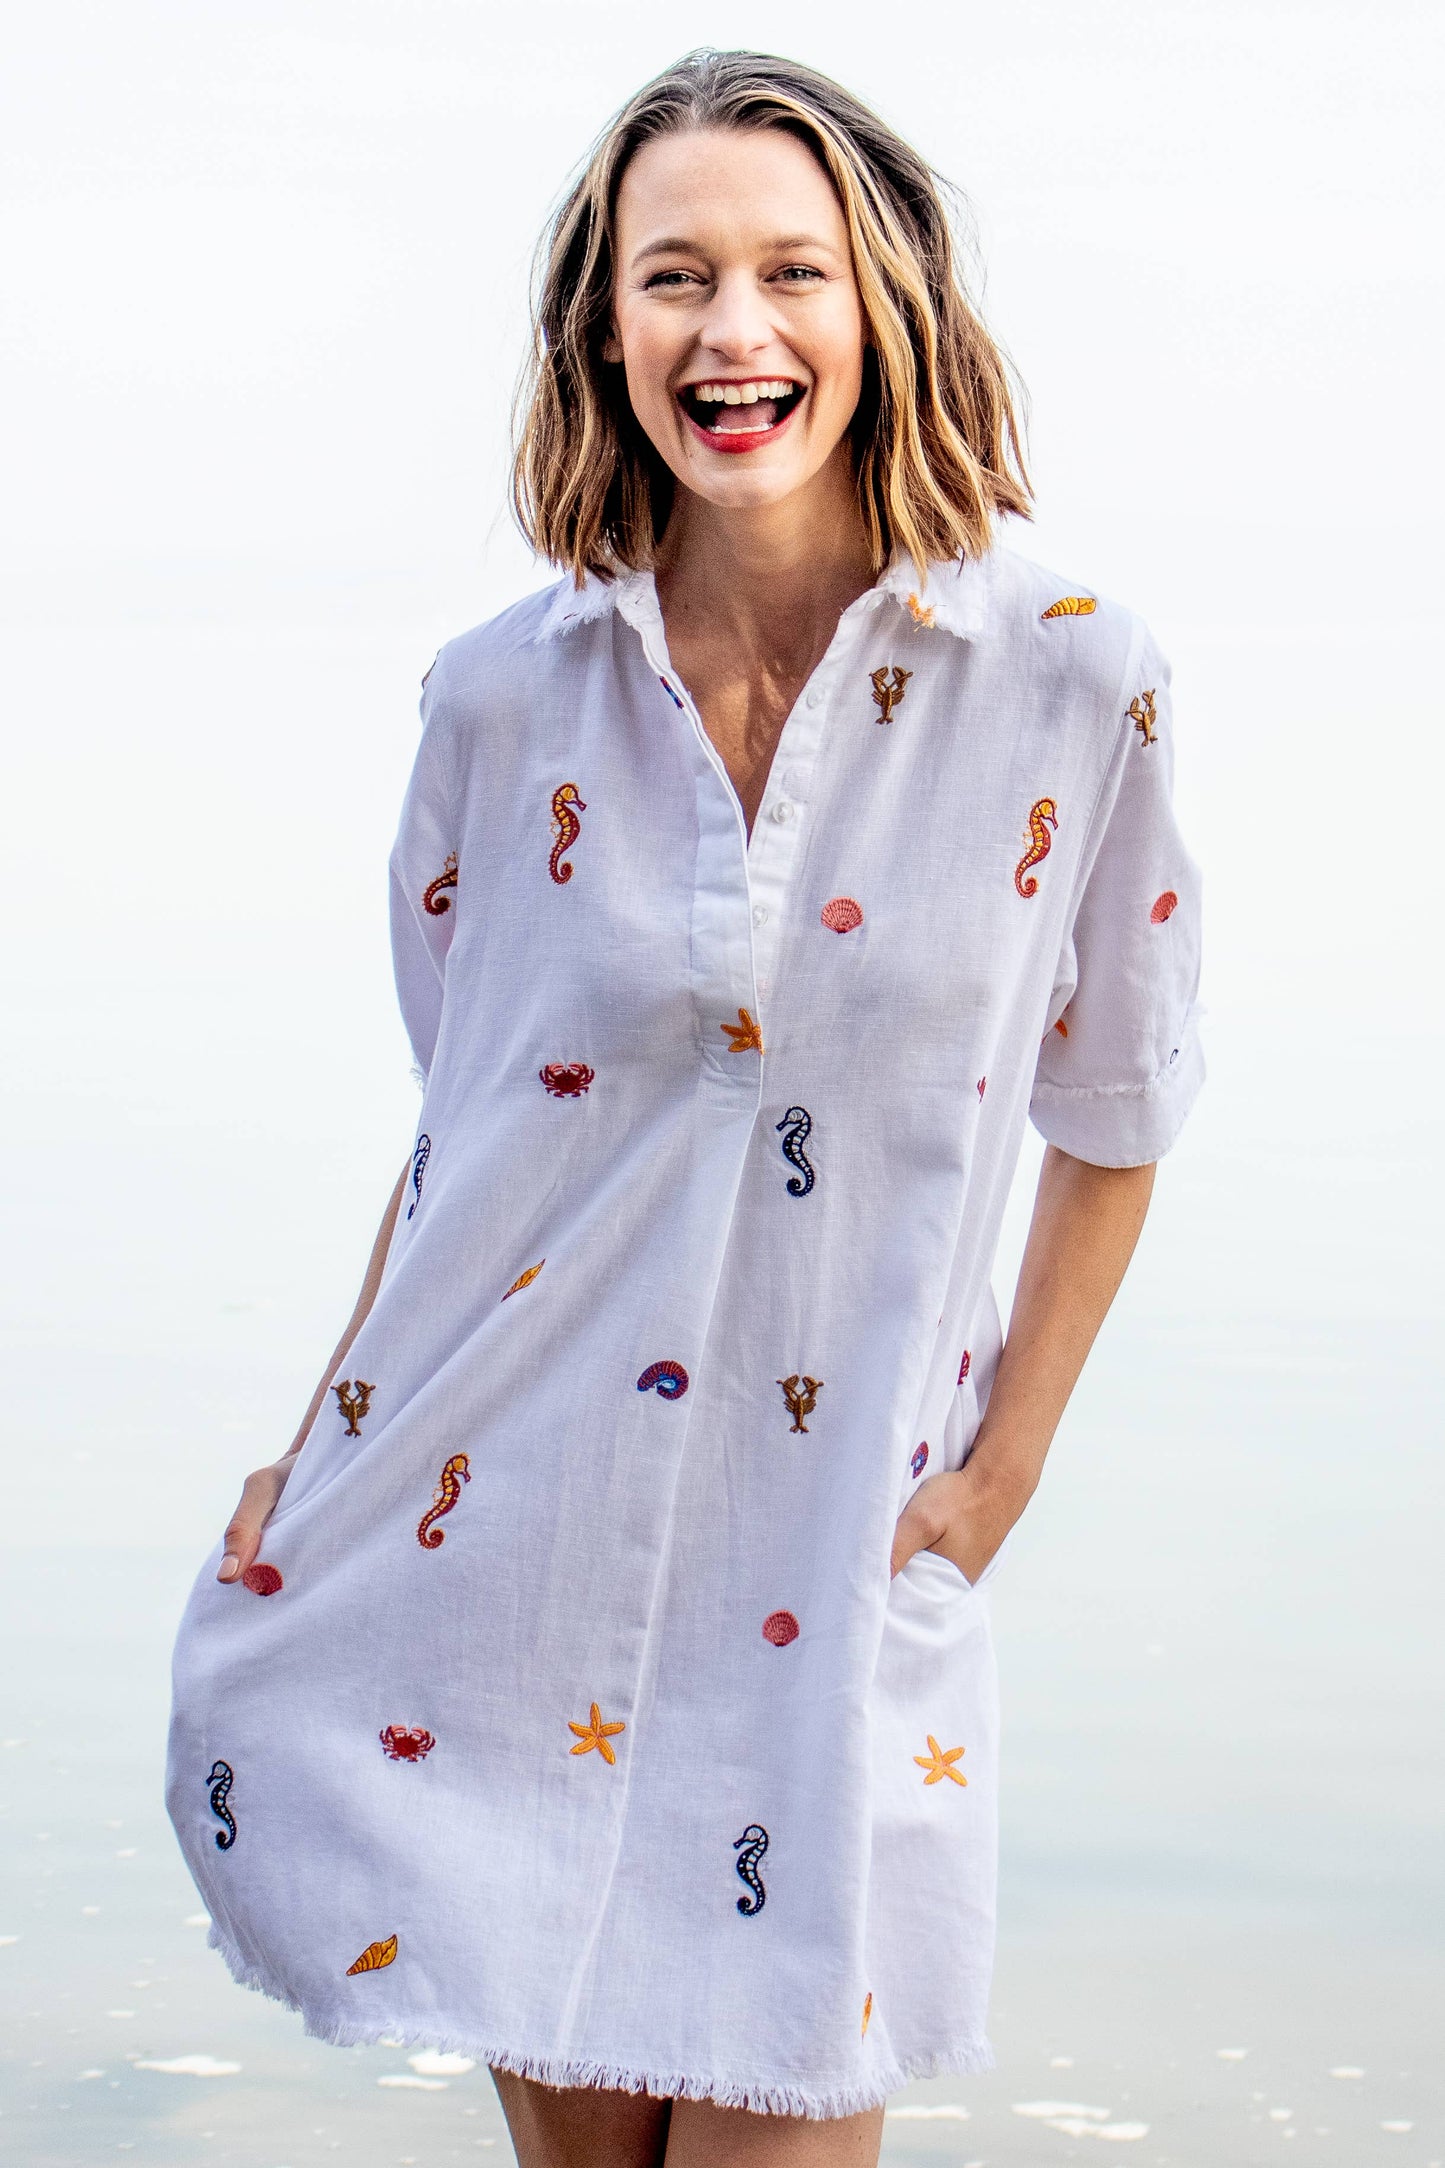 Dizzy-Lizzie - Chatham dress, 615A-R301 embroidered sealife